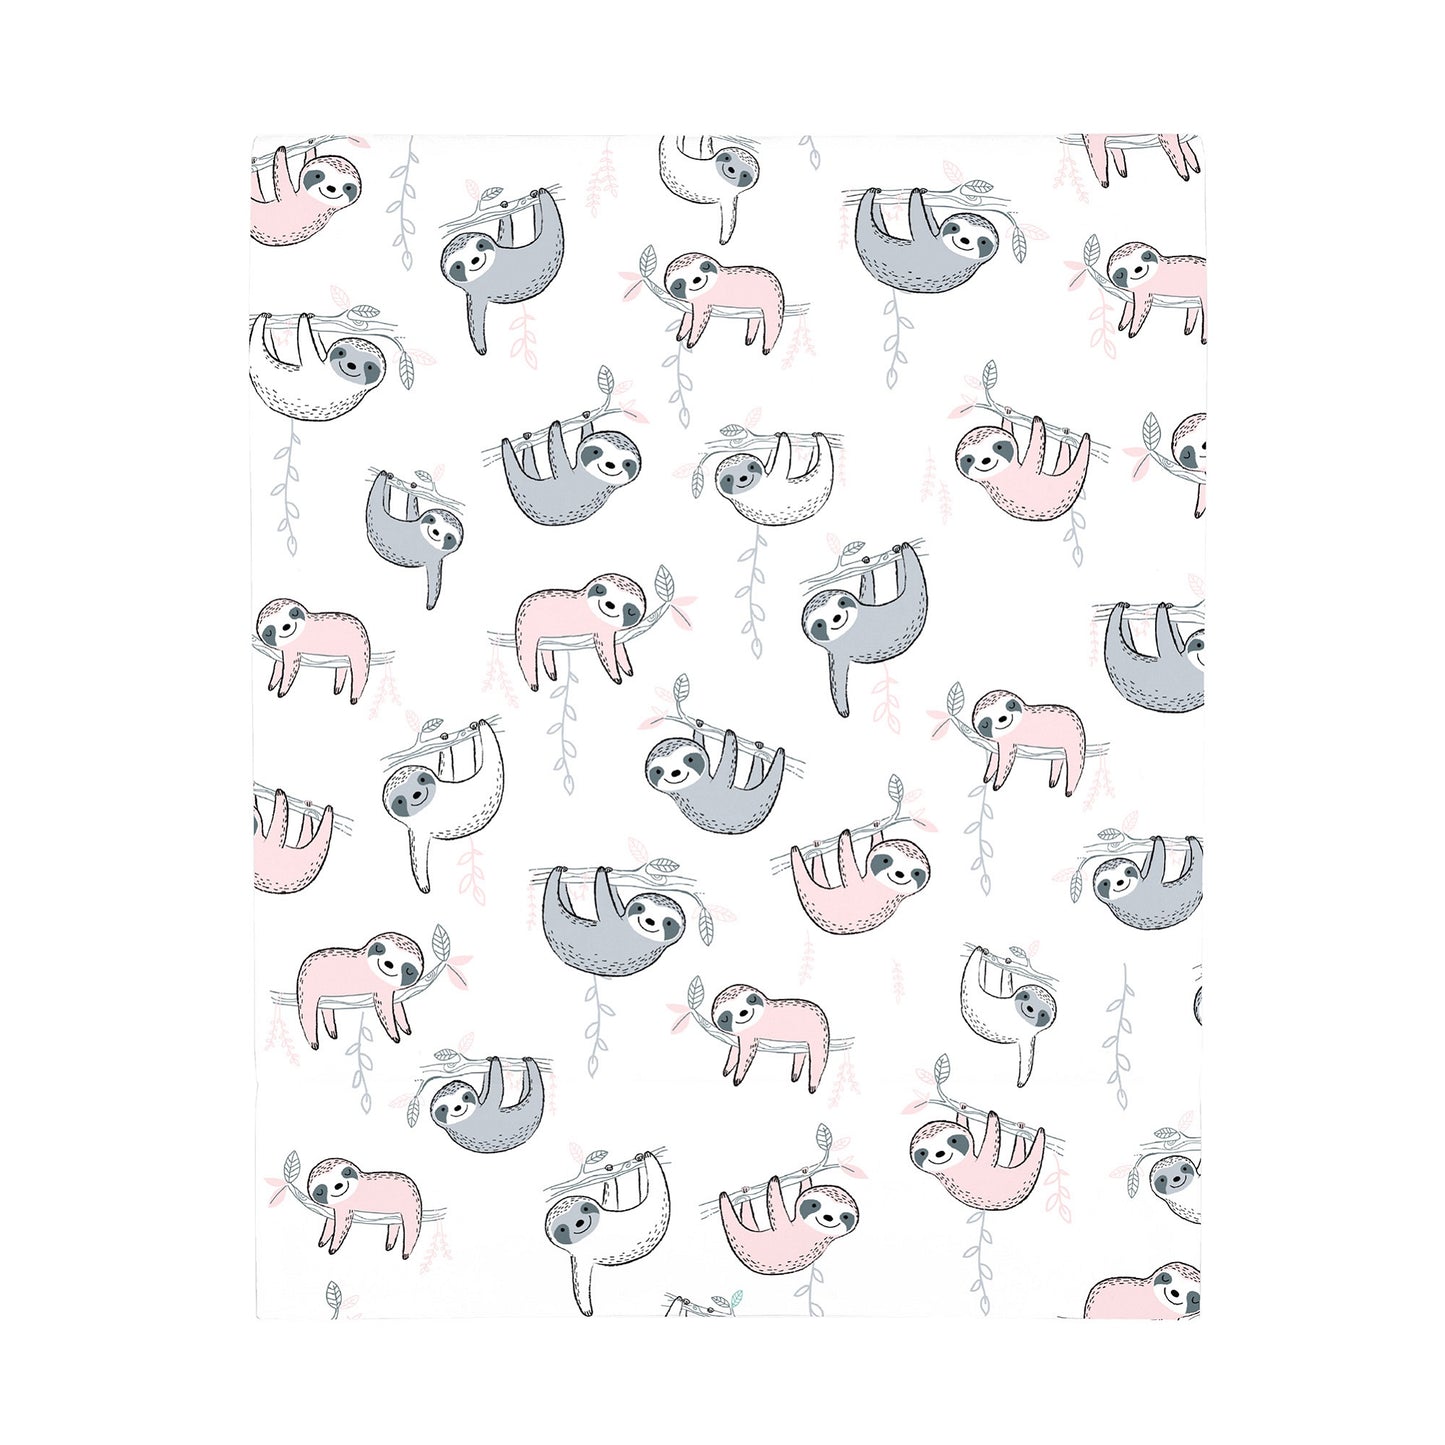 NoJo Super Soft Pink, Grey and White Sloth Fitted Crib Sheet